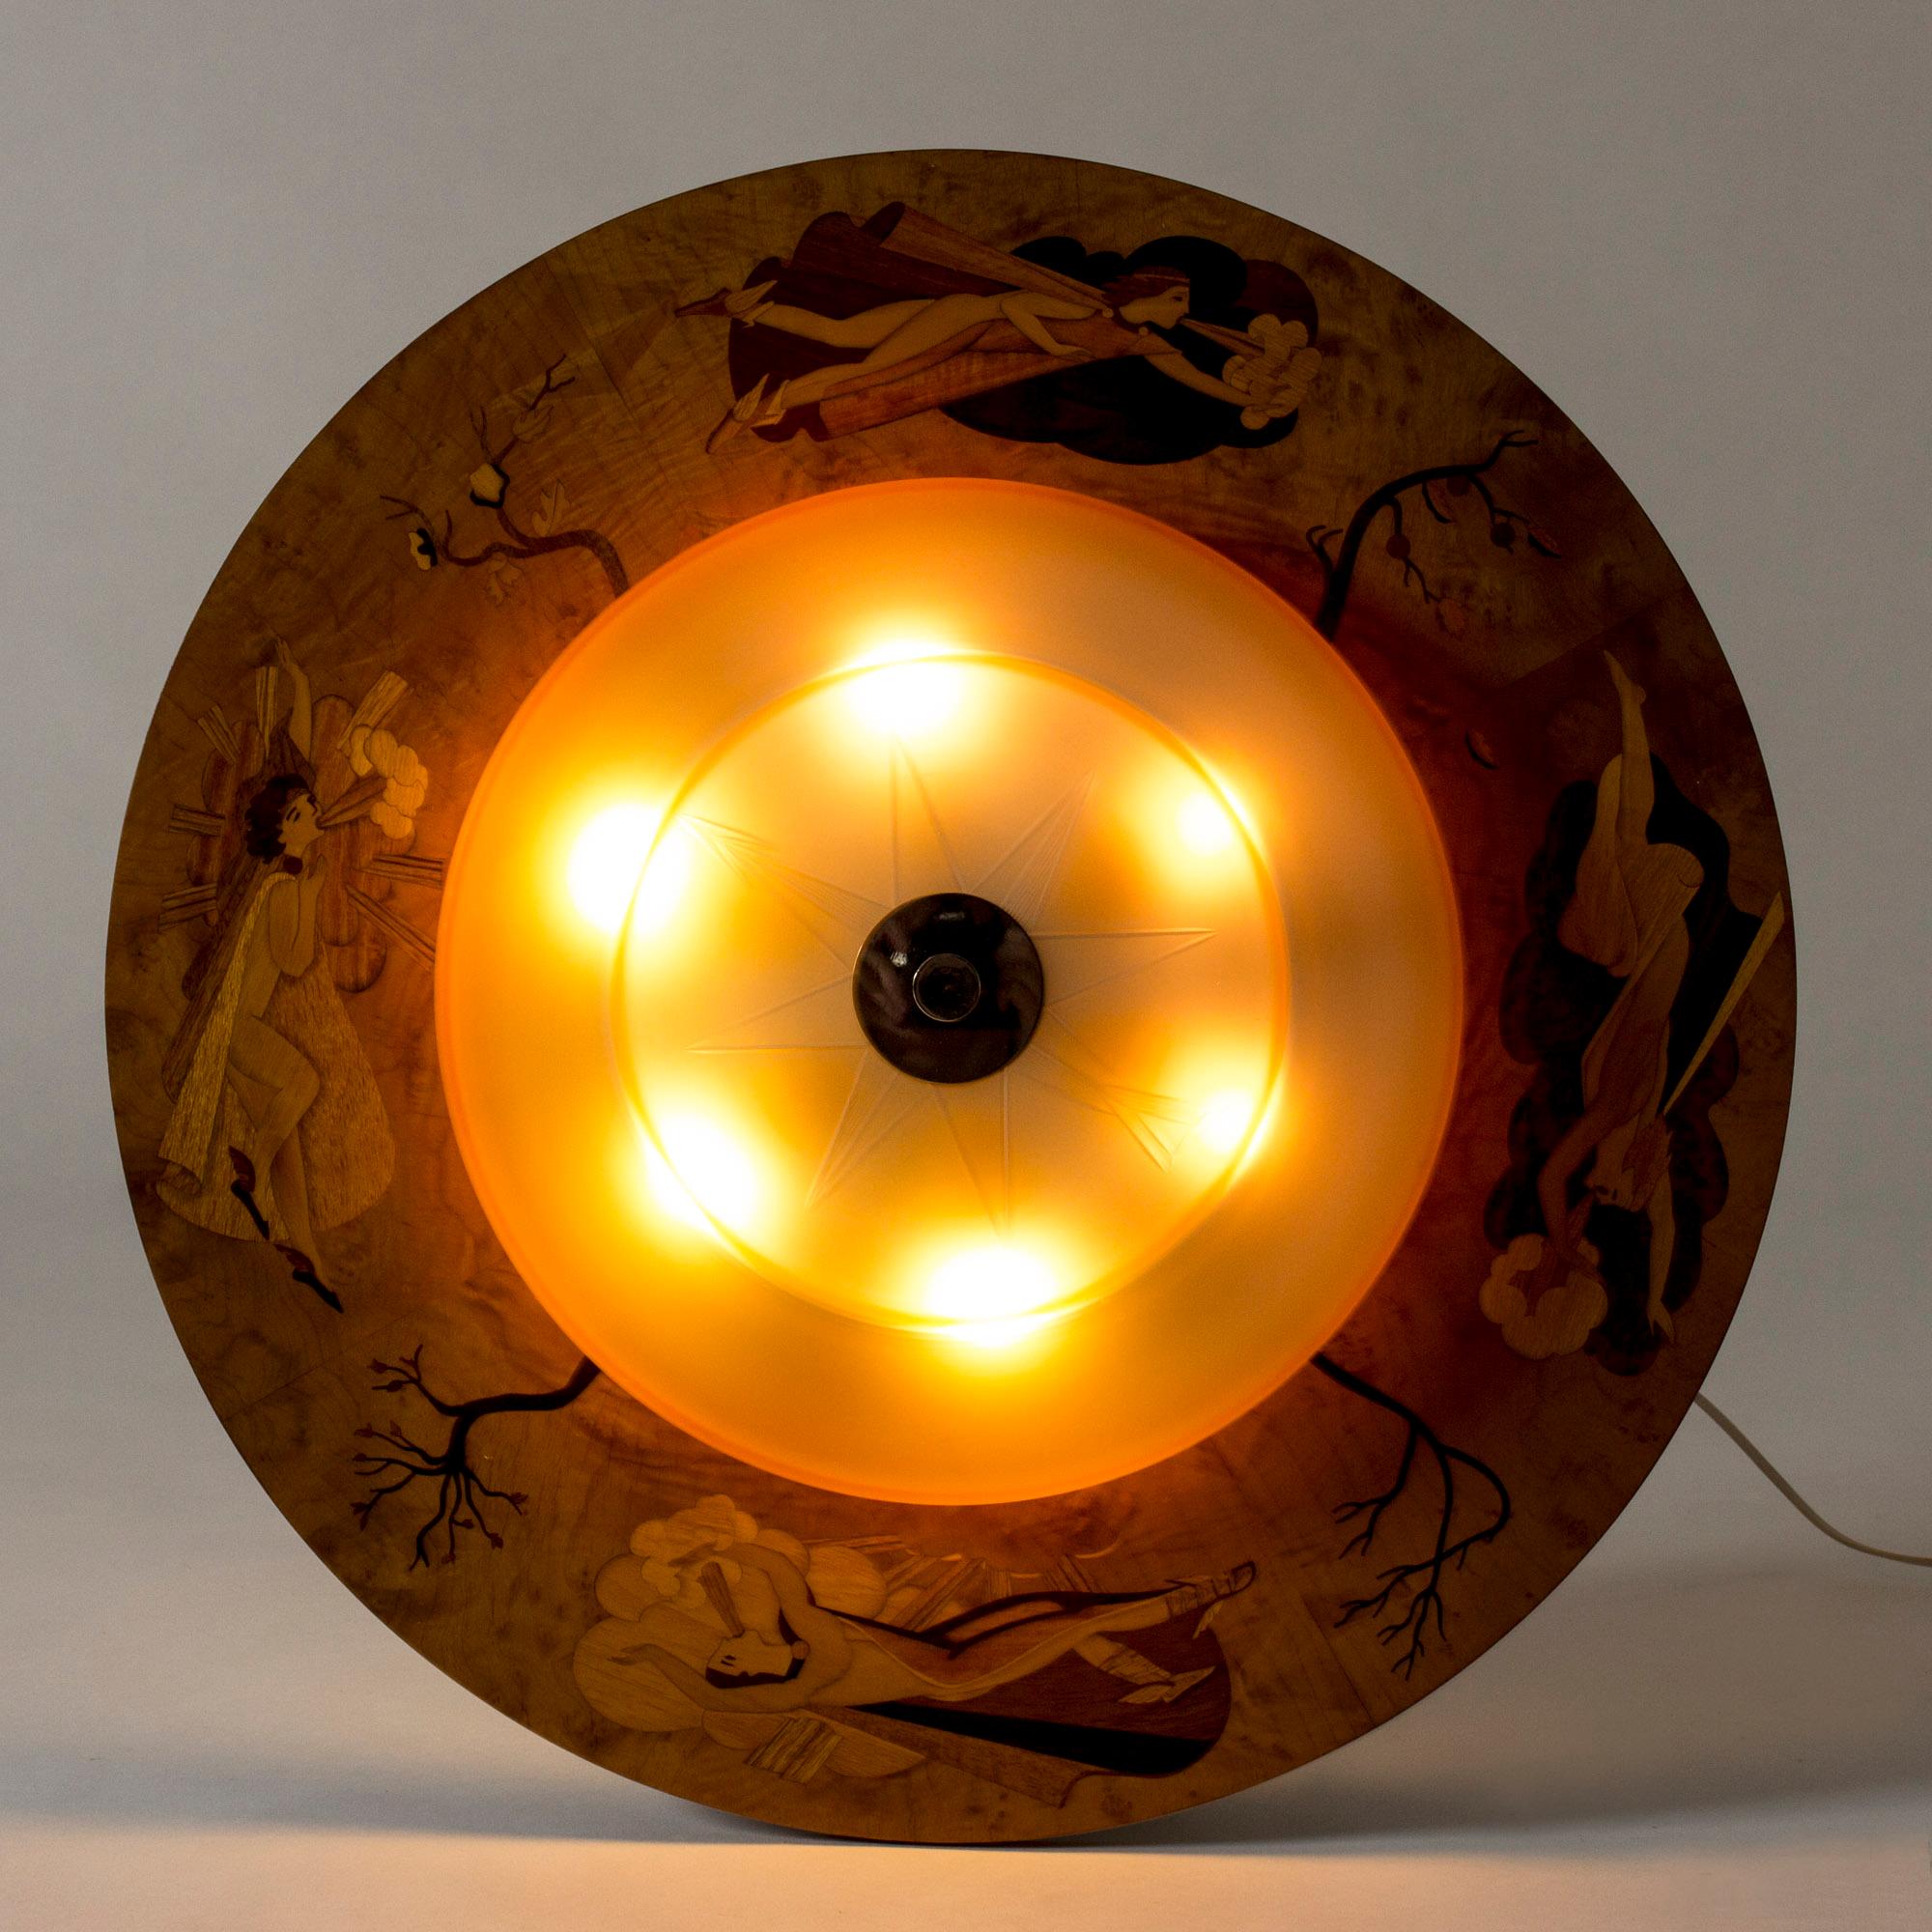 Striking, large 1930s flush mount ceiling light by Birger Ekman. Rare design with a round glass yellow nuance shade with the decor of a compass. Wide wooden frame with beautiful inlays of trees during different seasons and female wind spirits